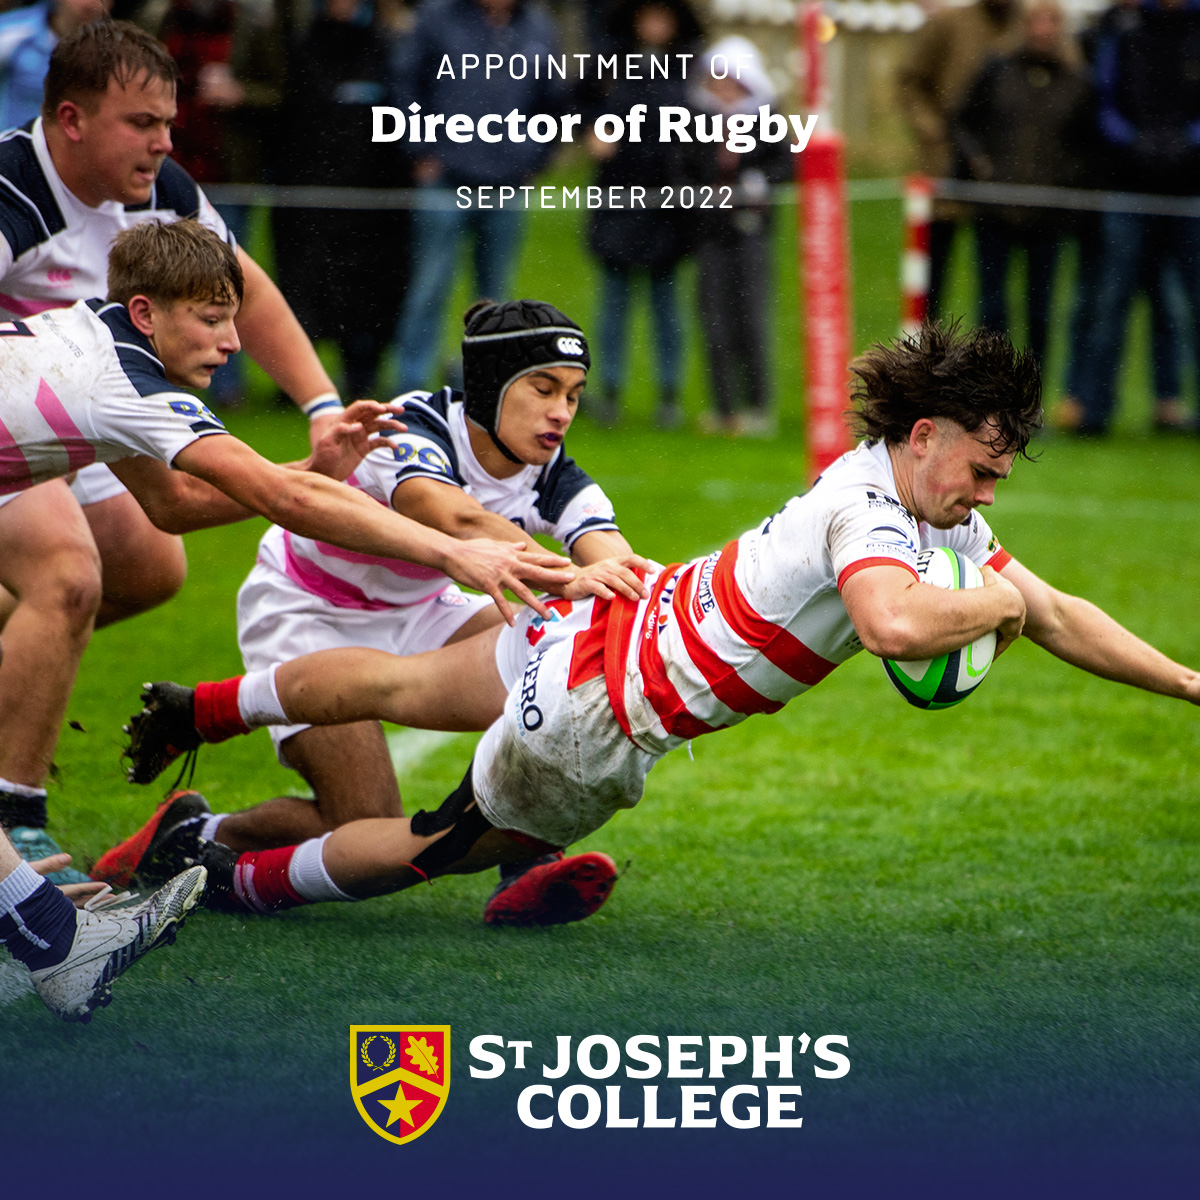 Job alert: Director of Rugby at St Joseph's College. The position will have full responsibility for all aspects of the game @MyStJos and its prep school. For more information, a route to application or to see the Job Description, visit jobsinsport.online/job/79/directo… #jobsinsport #jobs